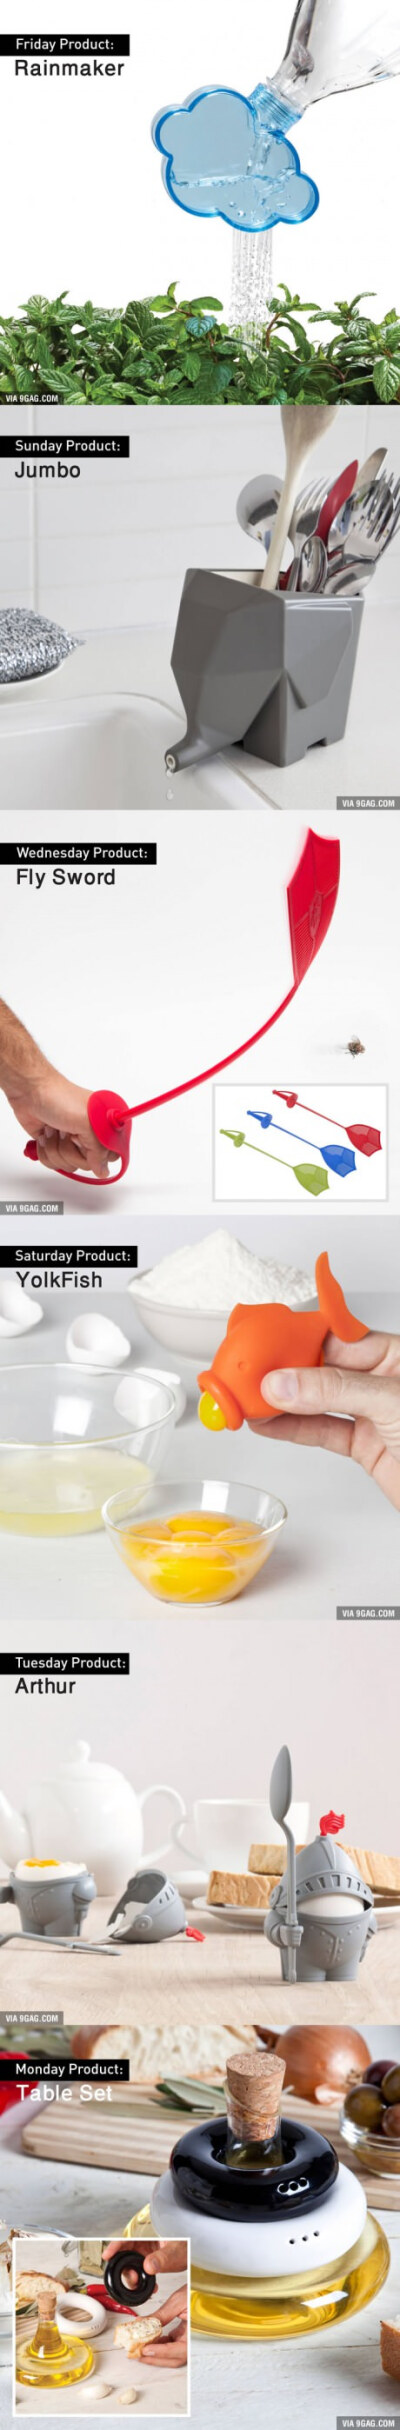 Buy All These Creative Household Gadgets!